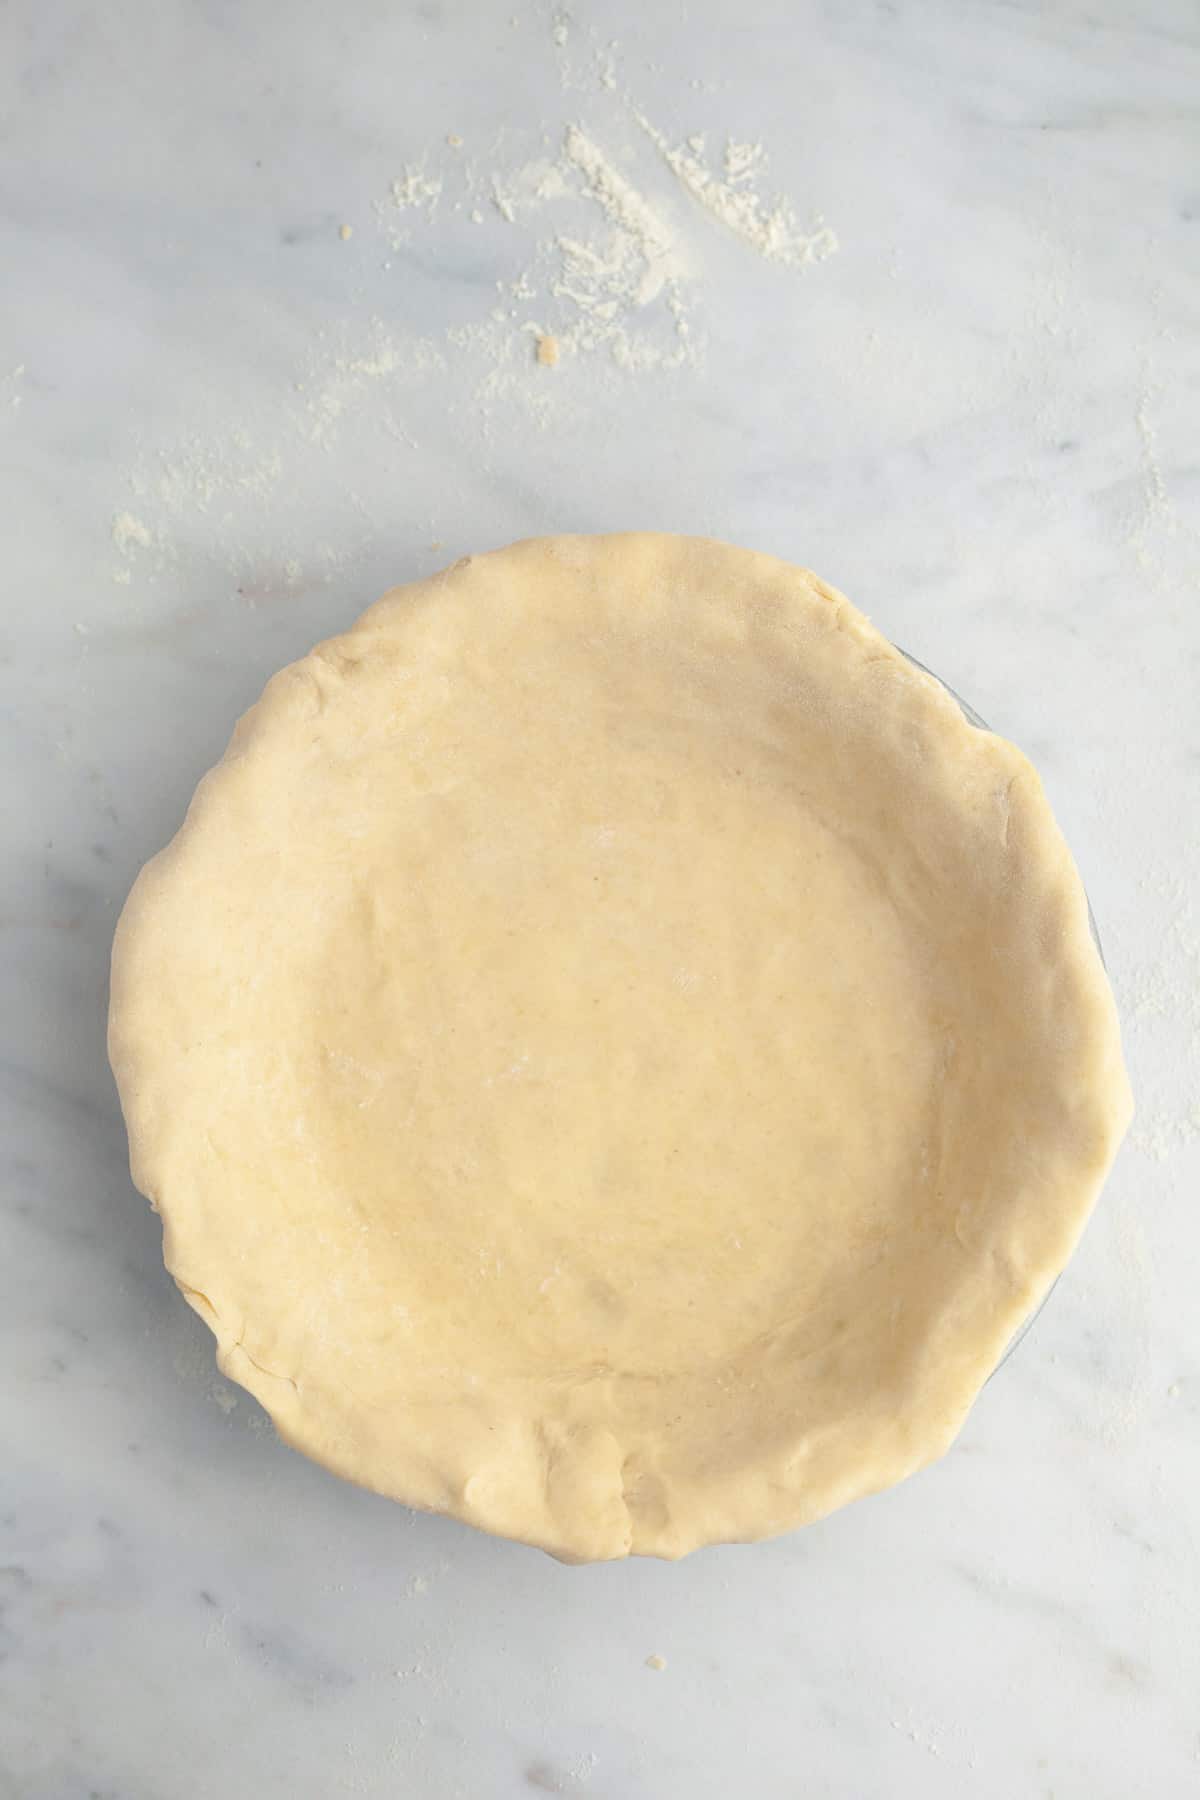 Unbaked pie dough in a pie plate.